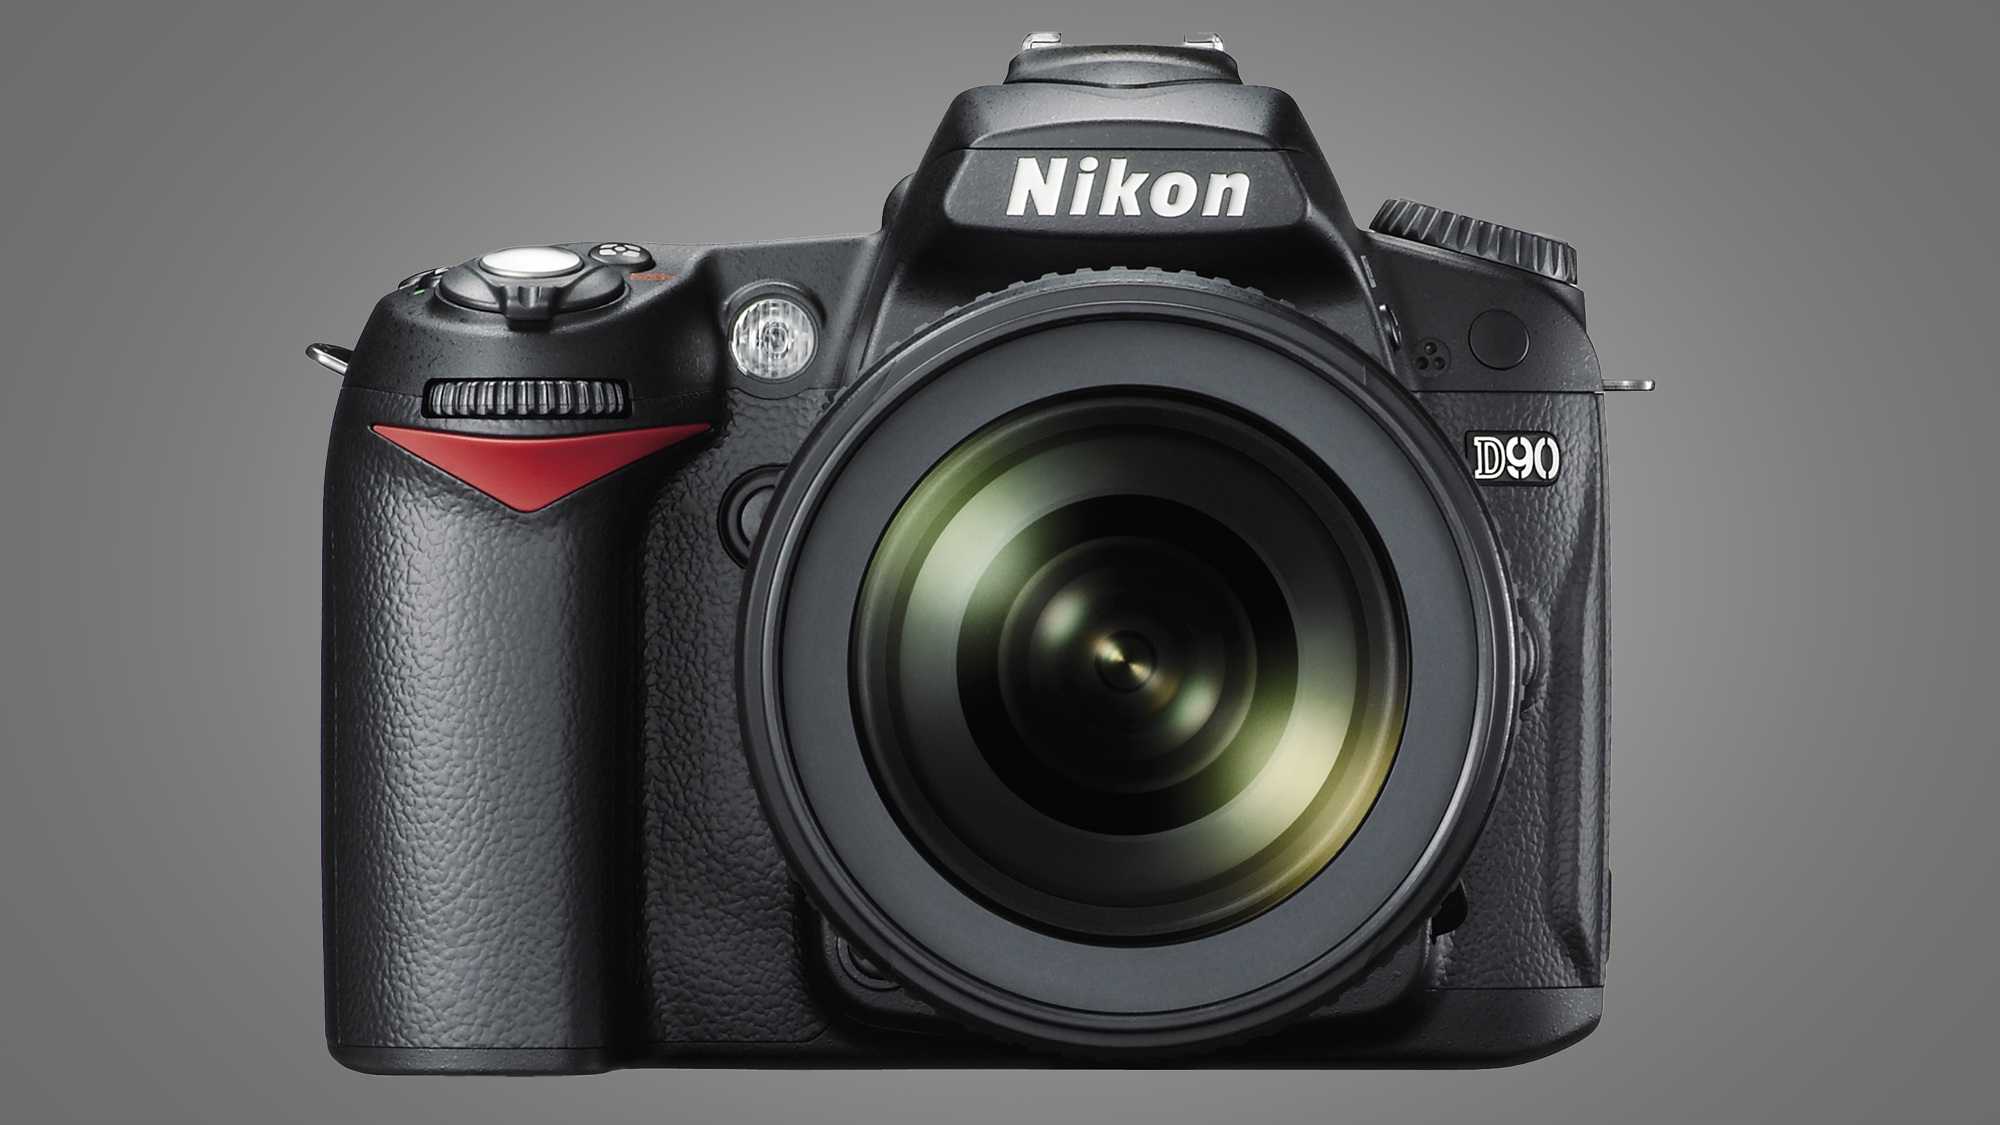 The Nikon D90 on a grey background